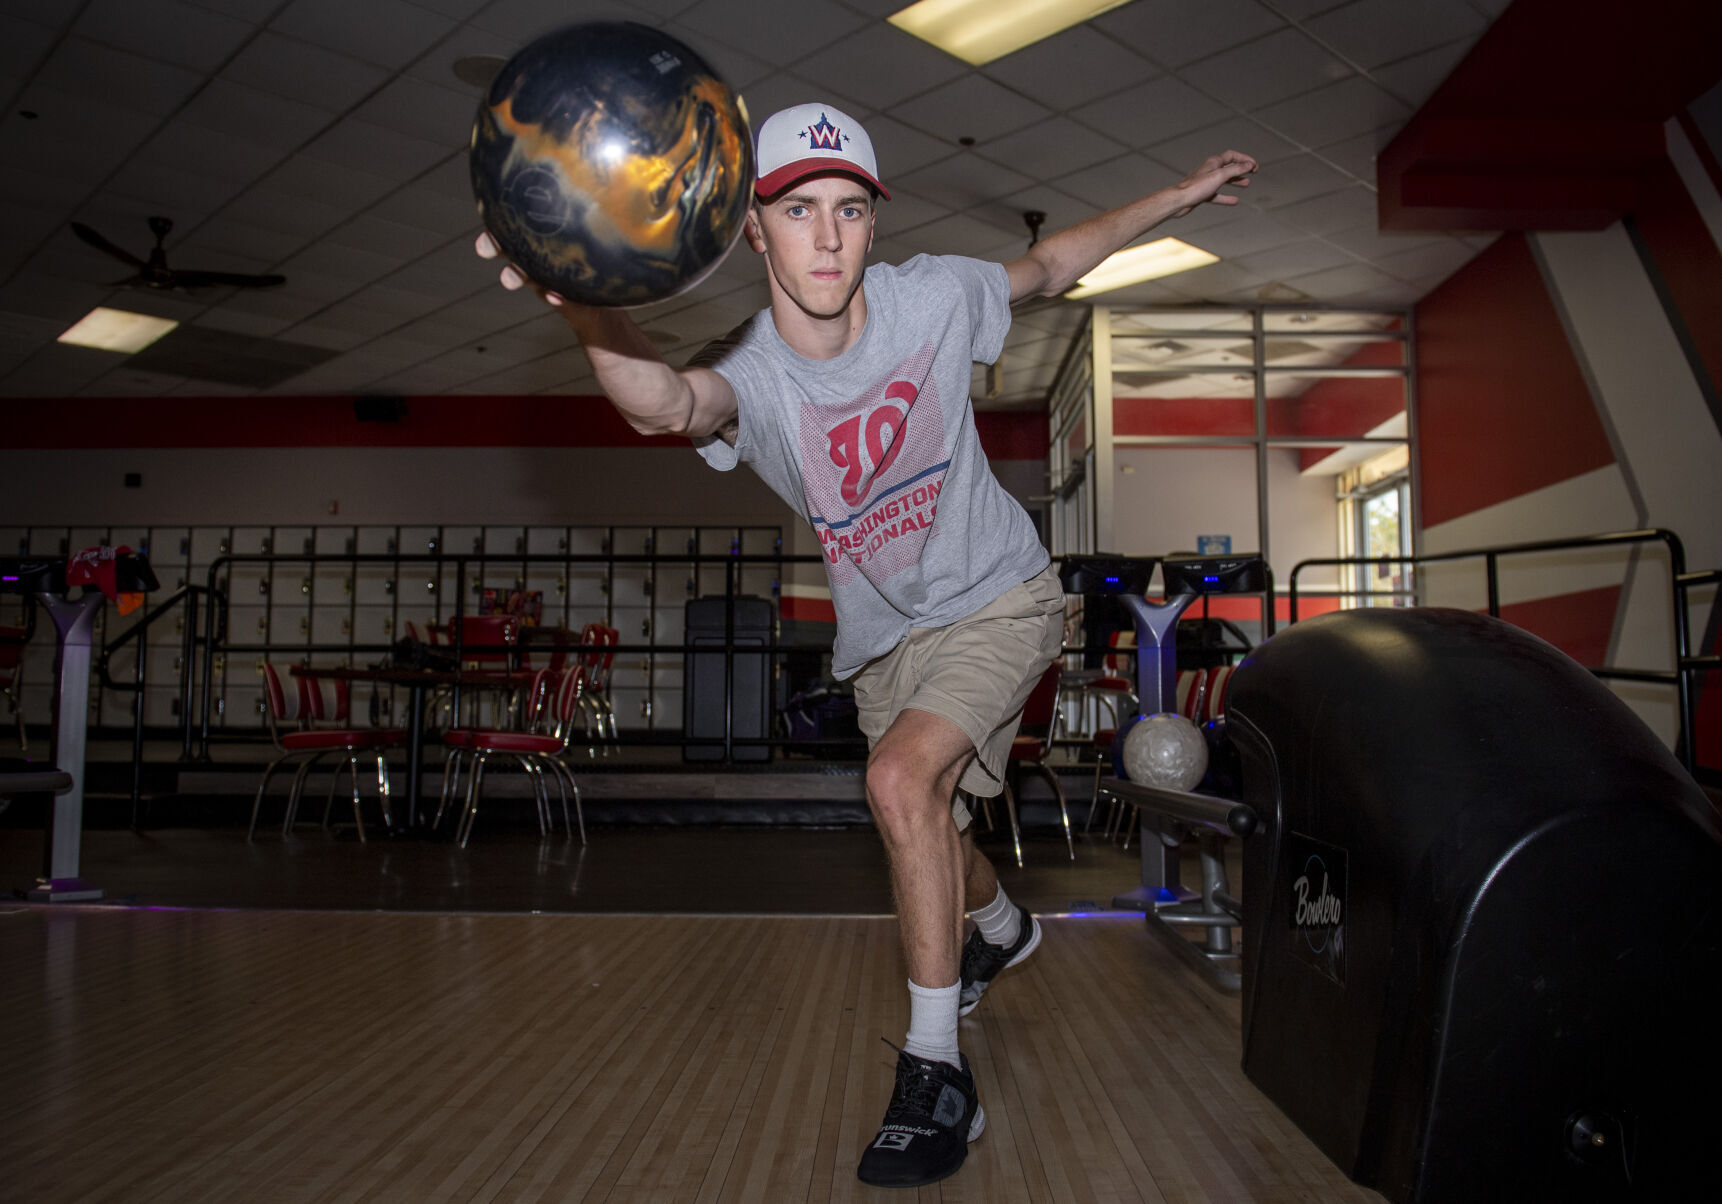 Rolling with it Brunswicks Callahan, 19, overcomes long odds, long day to bowl back-to-back perfect games Amateur fredericknewspost image photo